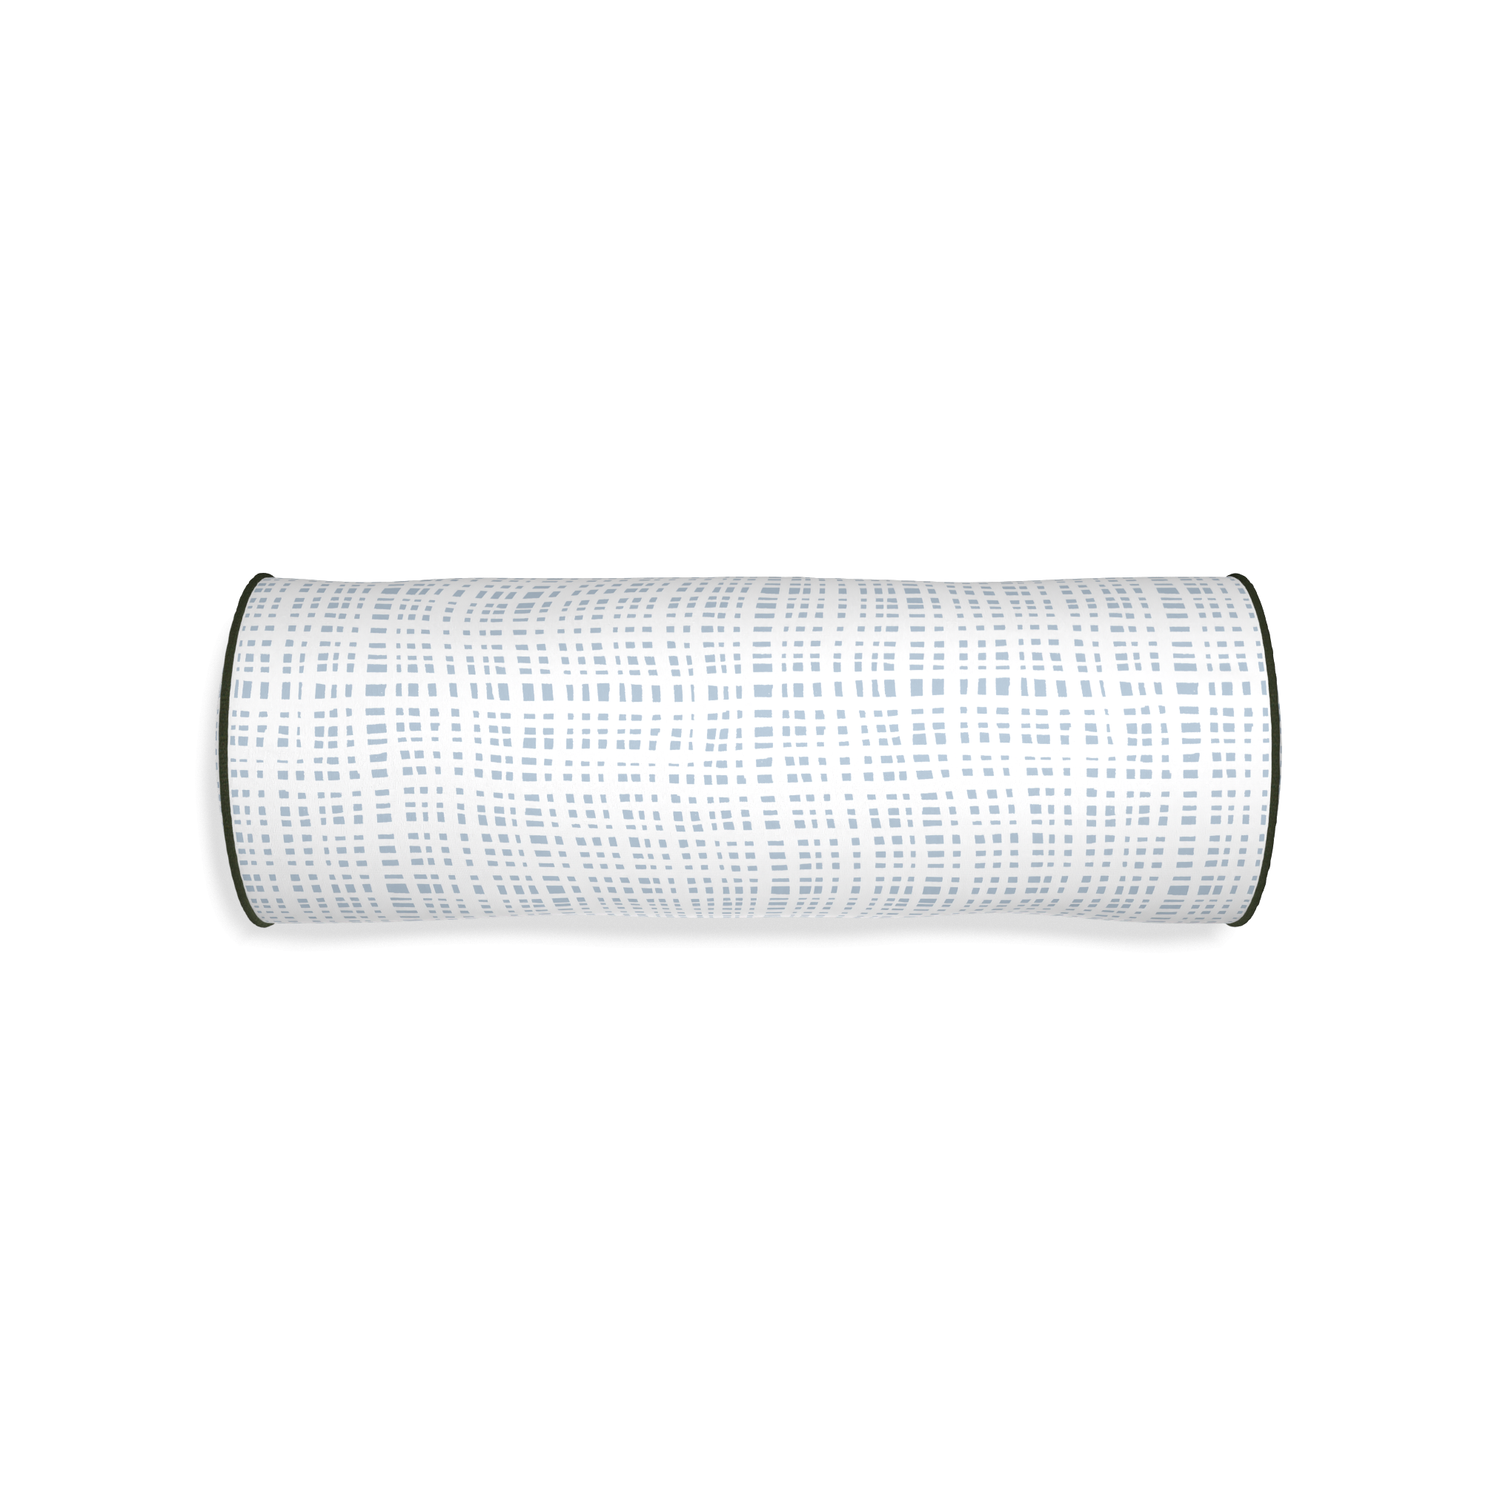 Bolster ginger custom plaid sky bluepillow with f piping on white background